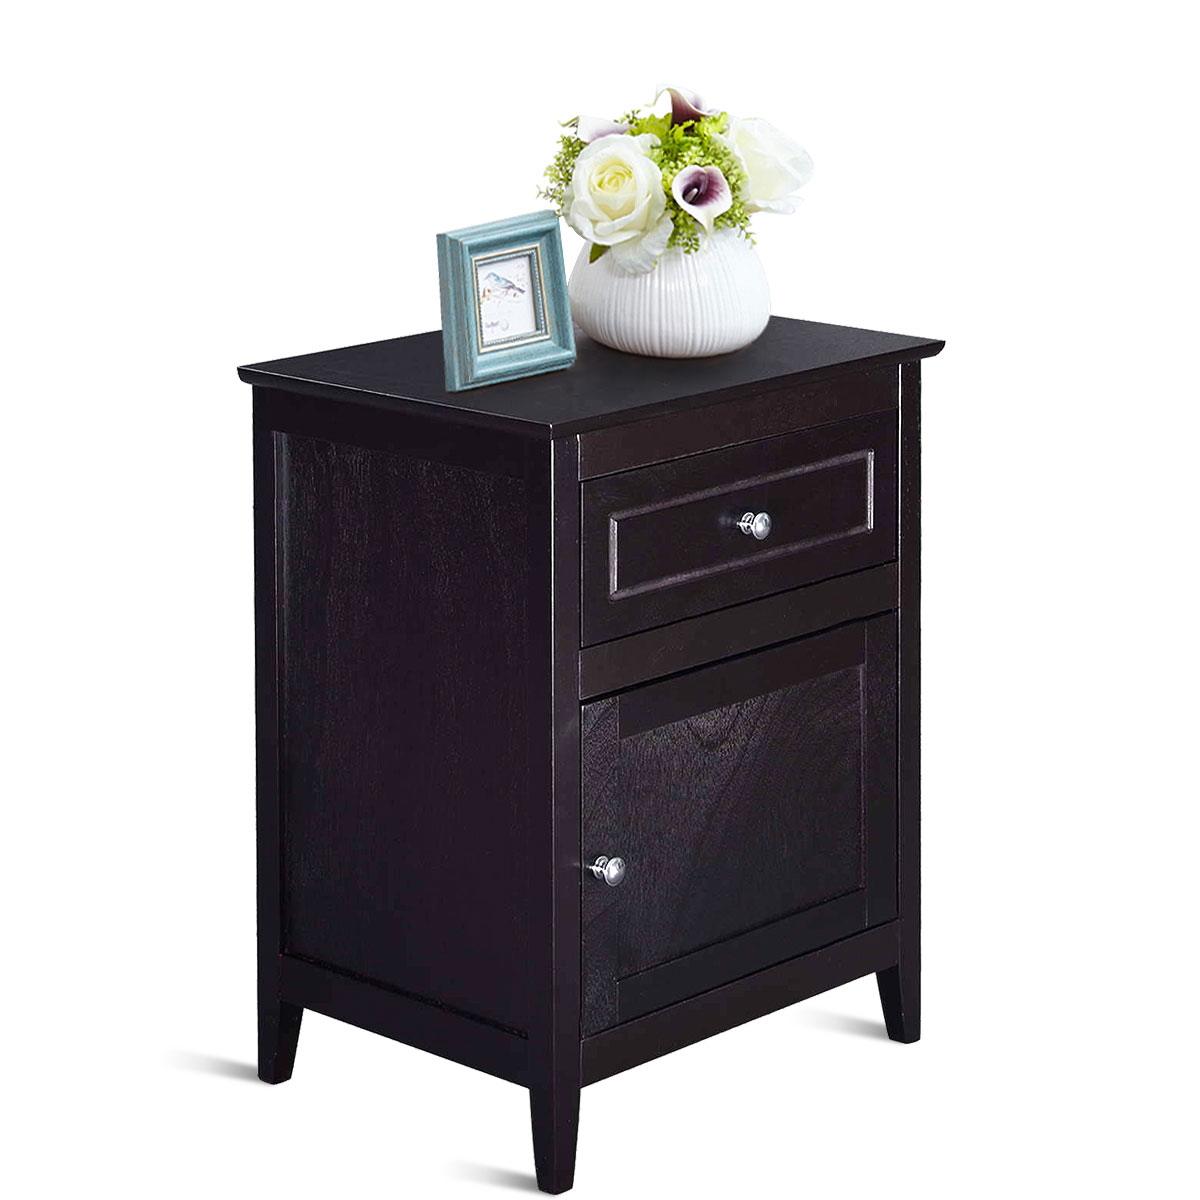 2-Tier Modern Badroom Nightstand with Drawer-Espresso